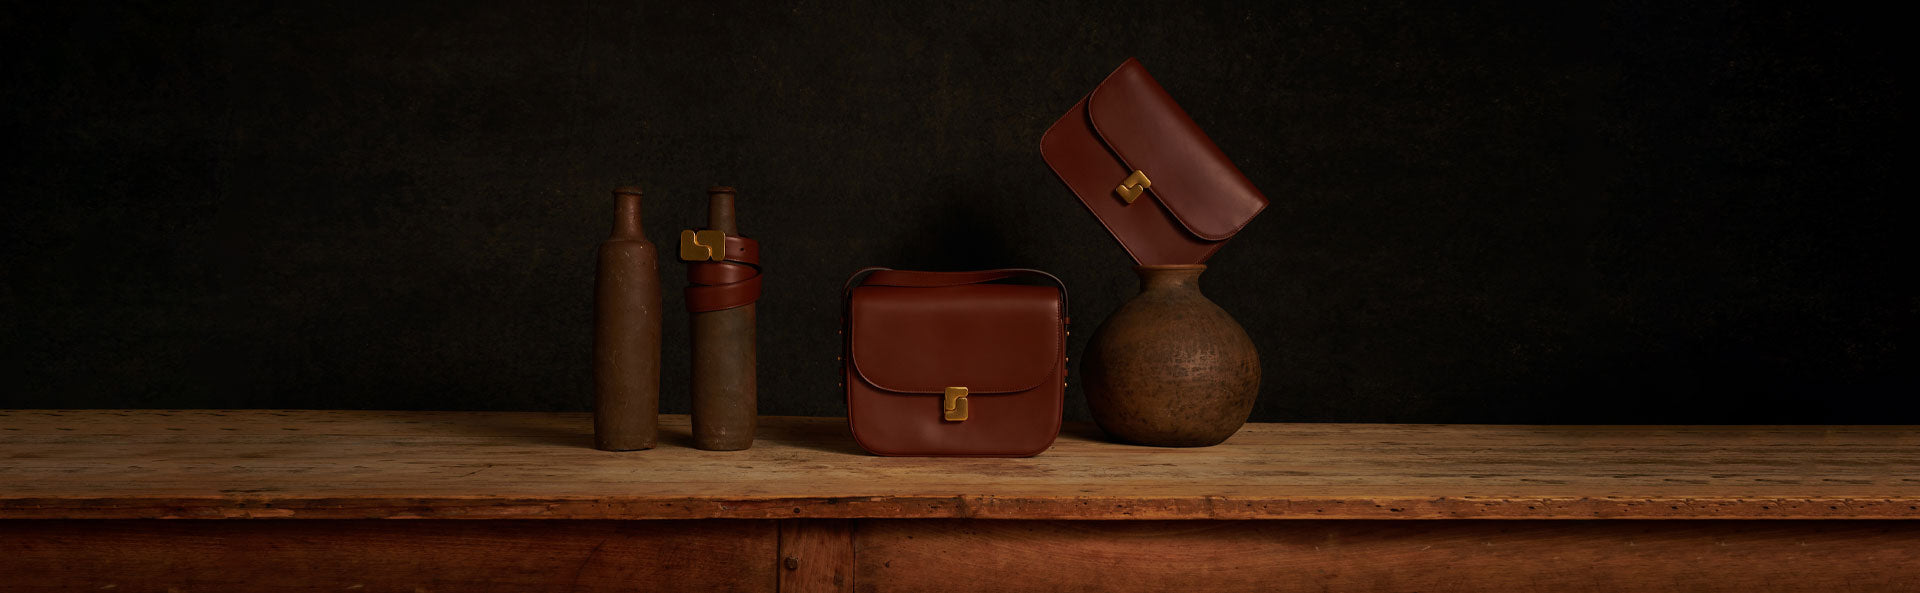 Soeur - How to take care of leather goods?